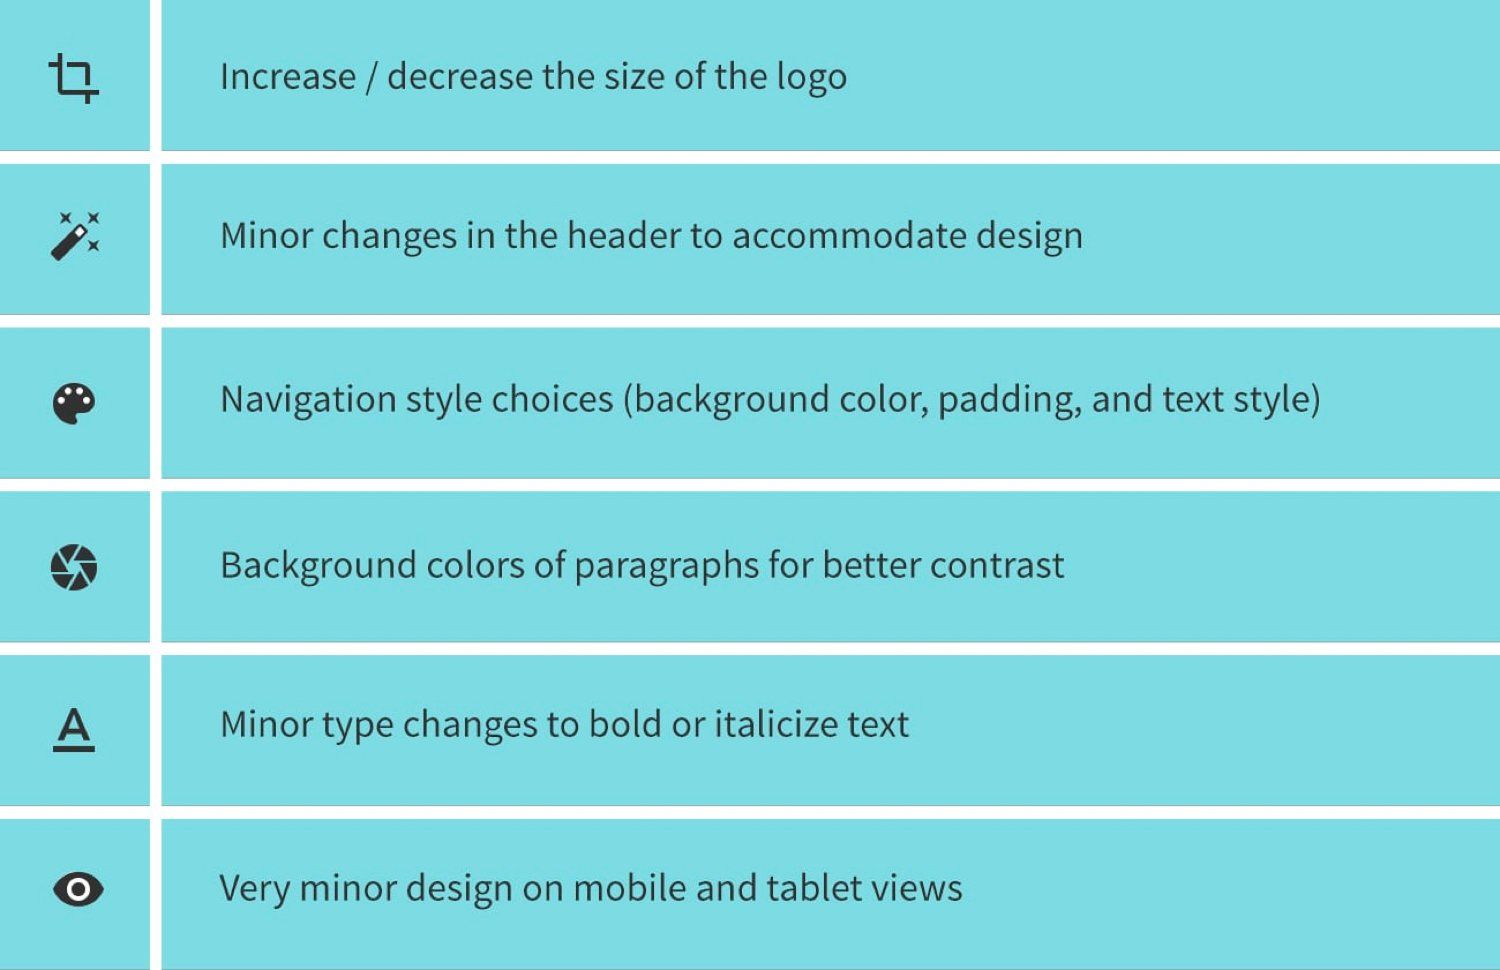 A list of website changes that may be needed after a website migration, including updates to the logo, header, navigation, paragraph background colors, and text styles.